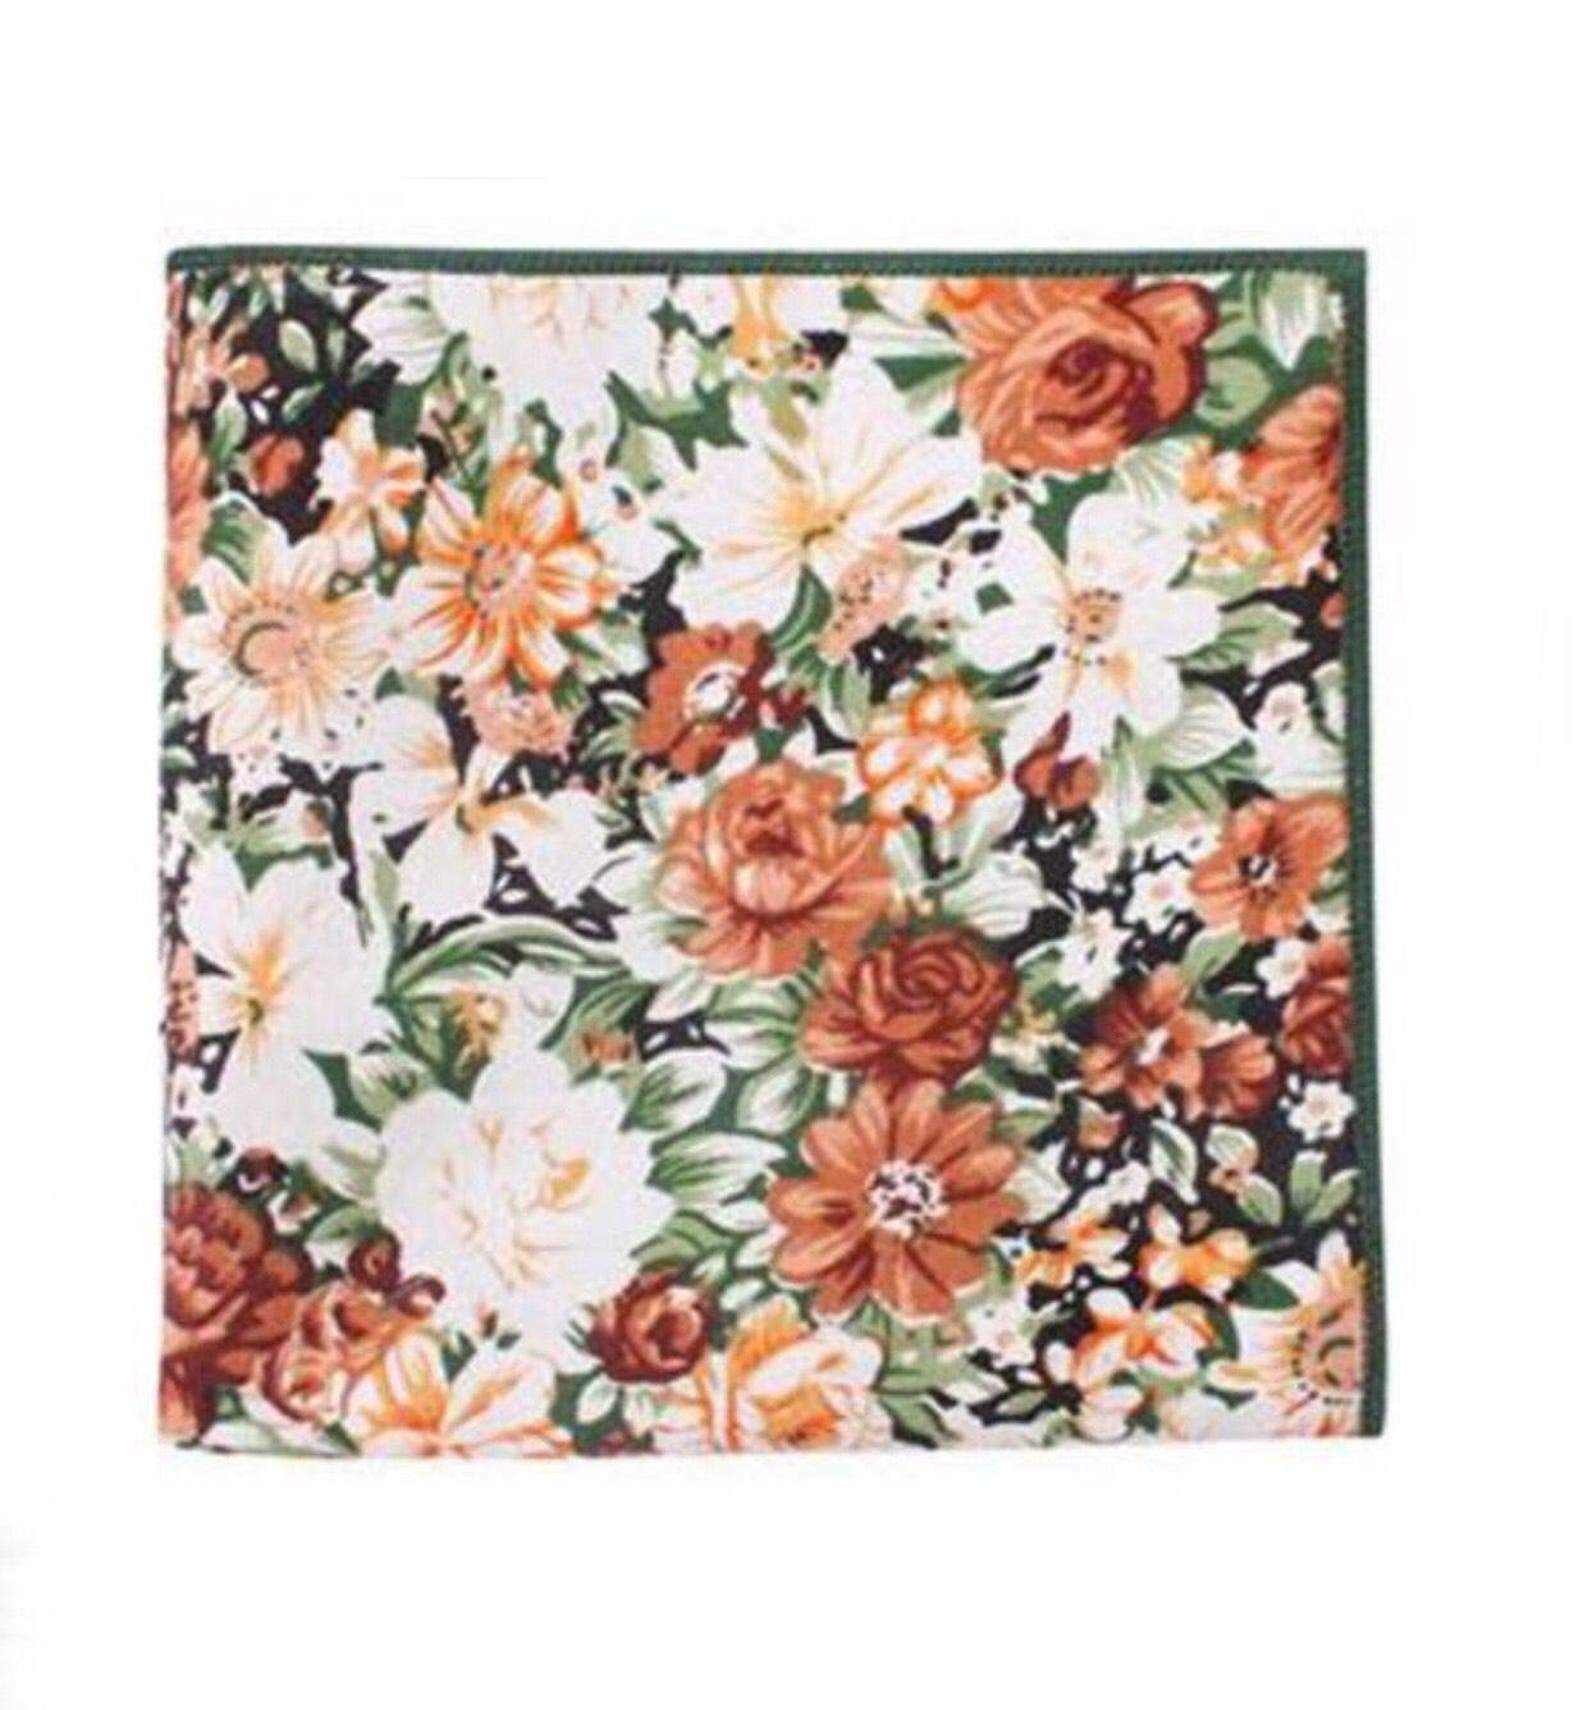 Orange Floral Pocket Square PEACH - MYTIESHOP | Orange Mytieshop Peach Floral Pocket Square Made from CottonItem Length: 23 cm ( 9 inches)Item Width : 22 cm (8.6 inches) Background Color: Black Trim: GreenA dashing addition to any outfit. This pocket square is the perfect way to spruce up your suit for any formal event. With a bright and colorful orange floral print, it&#39;ll add some personality to your look. Whether you&#39;re dressing up for a wedding or just accenting your everyday style, this pock